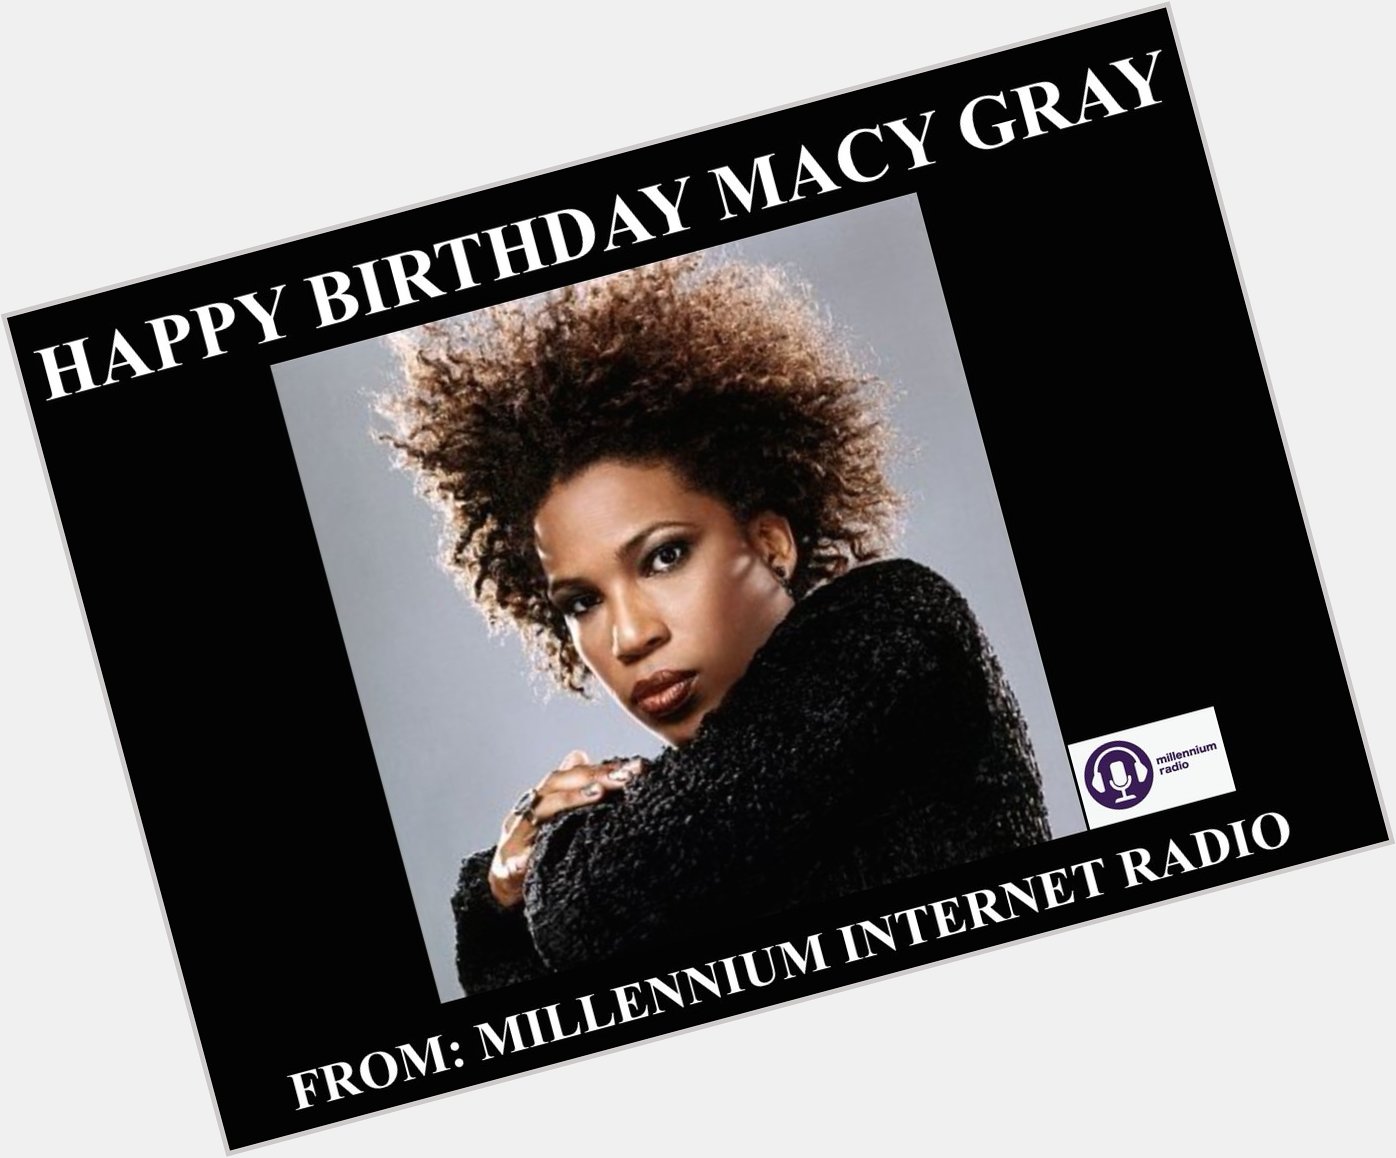 Happy Birthday to singer, songwriter, actress, record producer, and musician Macy Gray!! 